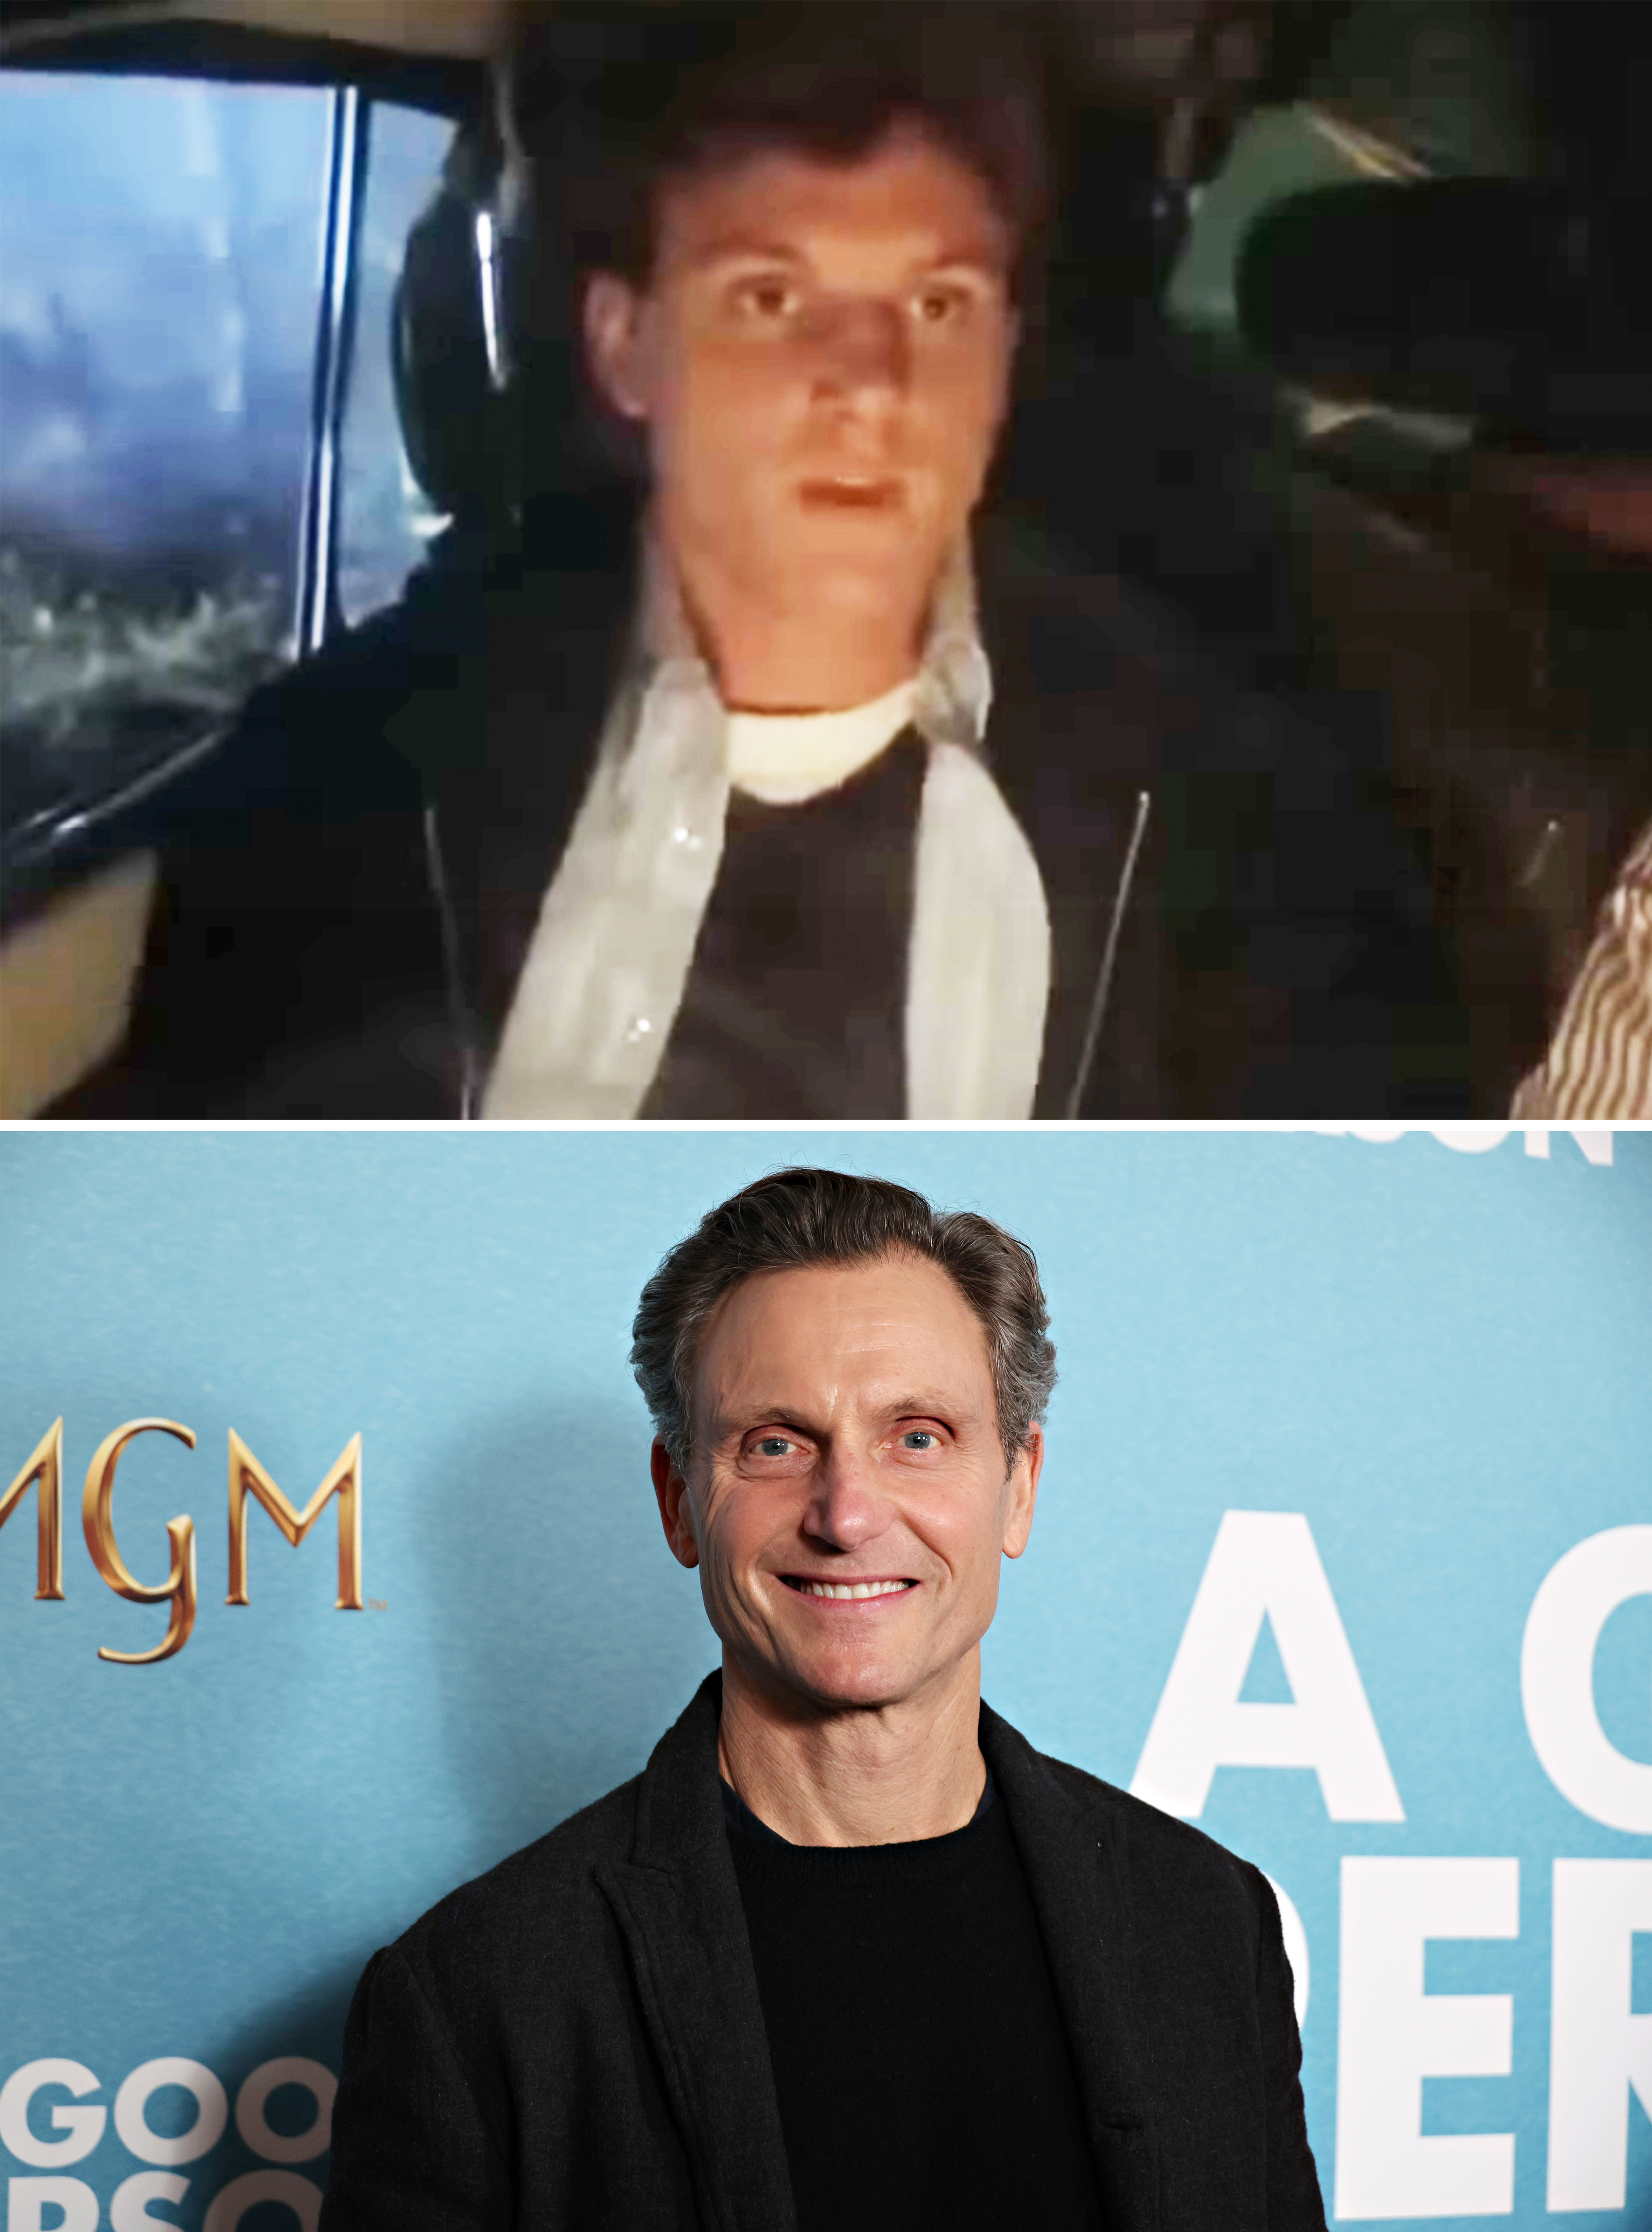 Tony in a scene from the movie and in a close-up at a media event